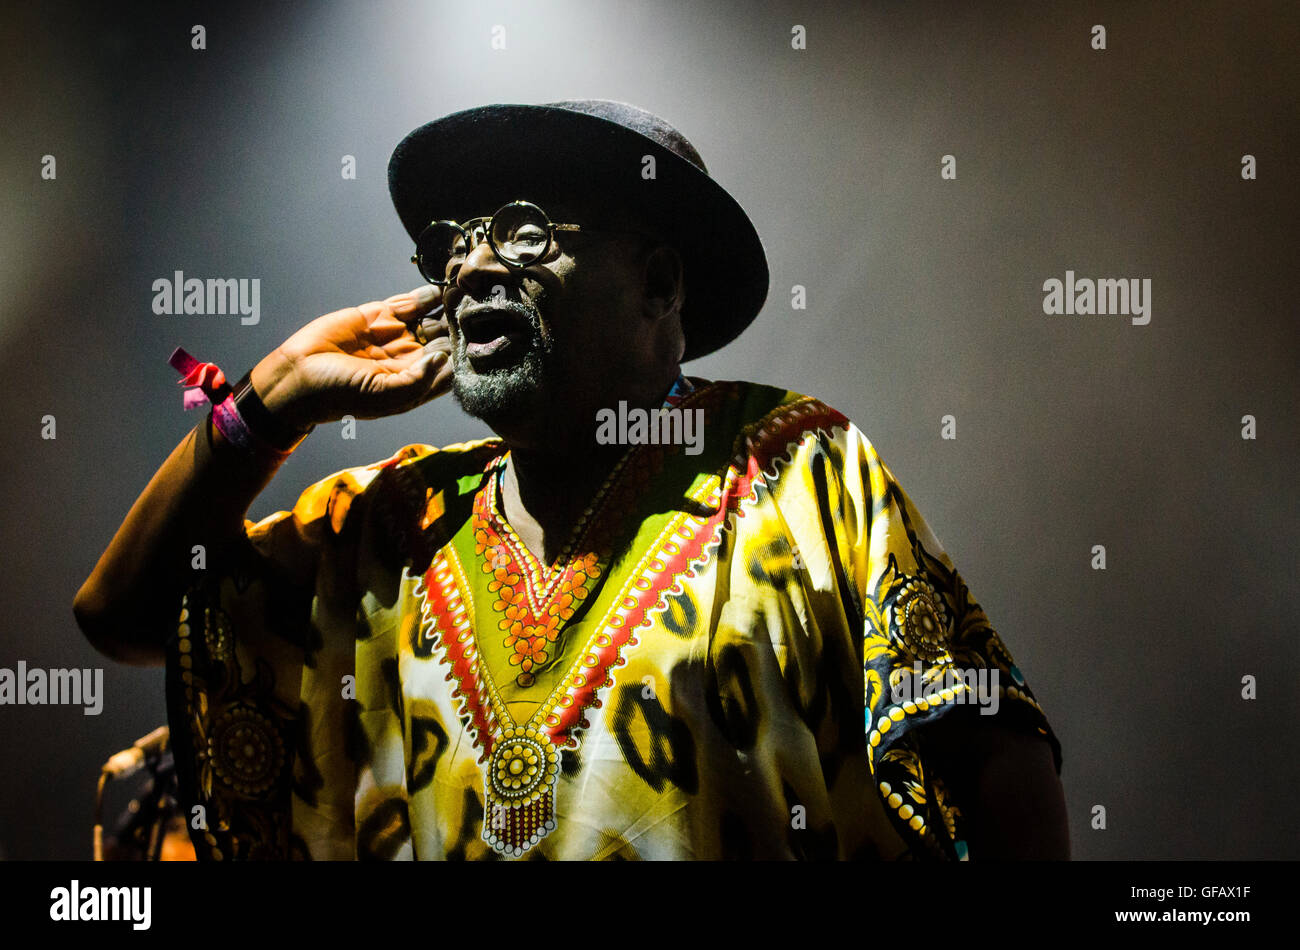 Charlton Park, Wiltshire, UK. 30th July, 2016. George Clinton Parliament Funkadelic headline the Open Air Stage at WOMAD festival. Credit:  Francesca Moore/Alamy Live News Stock Photo